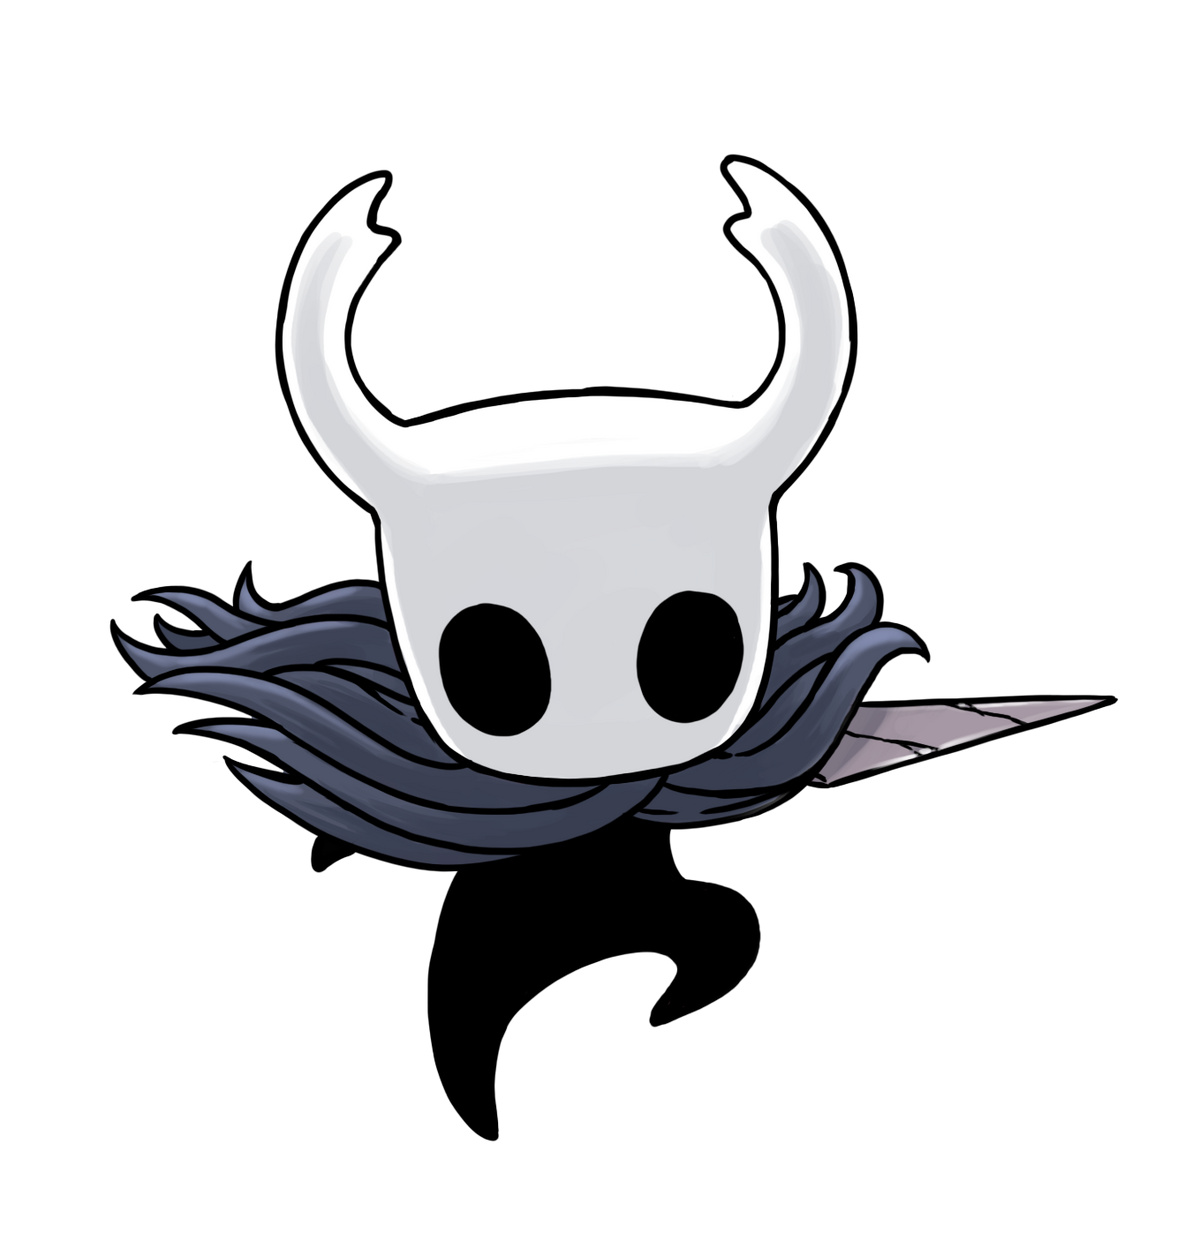 The Knight Hollow Knight Inconsistently Admirable Wiki Fandom